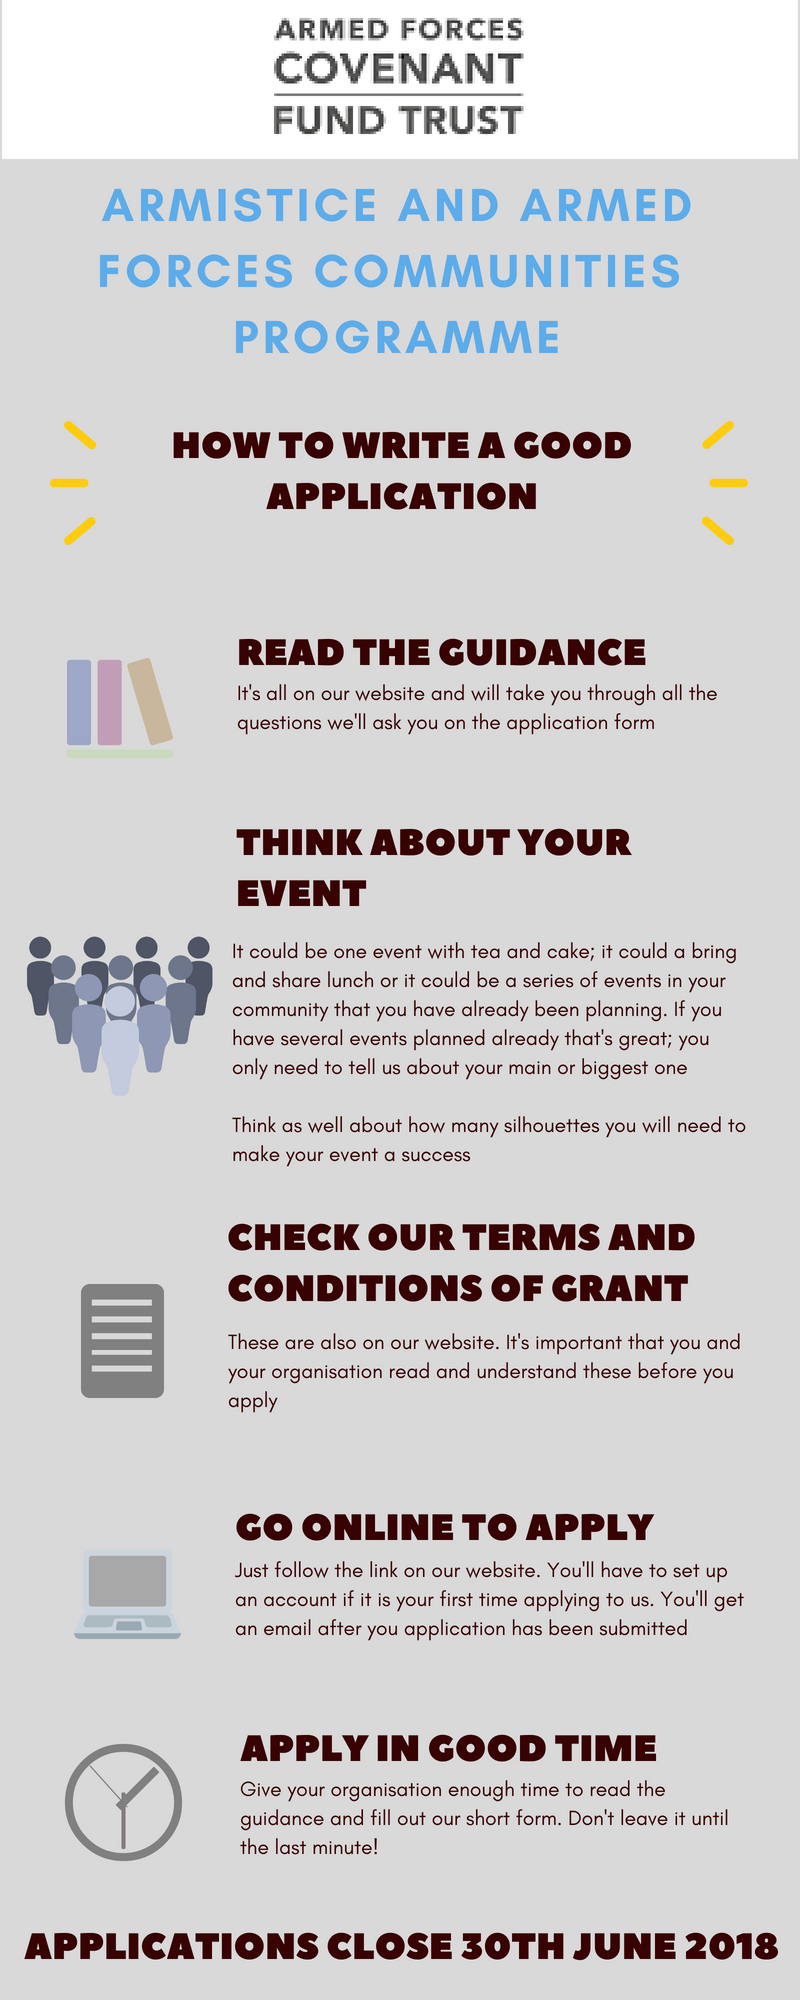 A diagram with information for applicants, How to write a good application. Read the Guidance.  Think about your event. Check our terms and conditions of grant, go online to apply, apply in good time